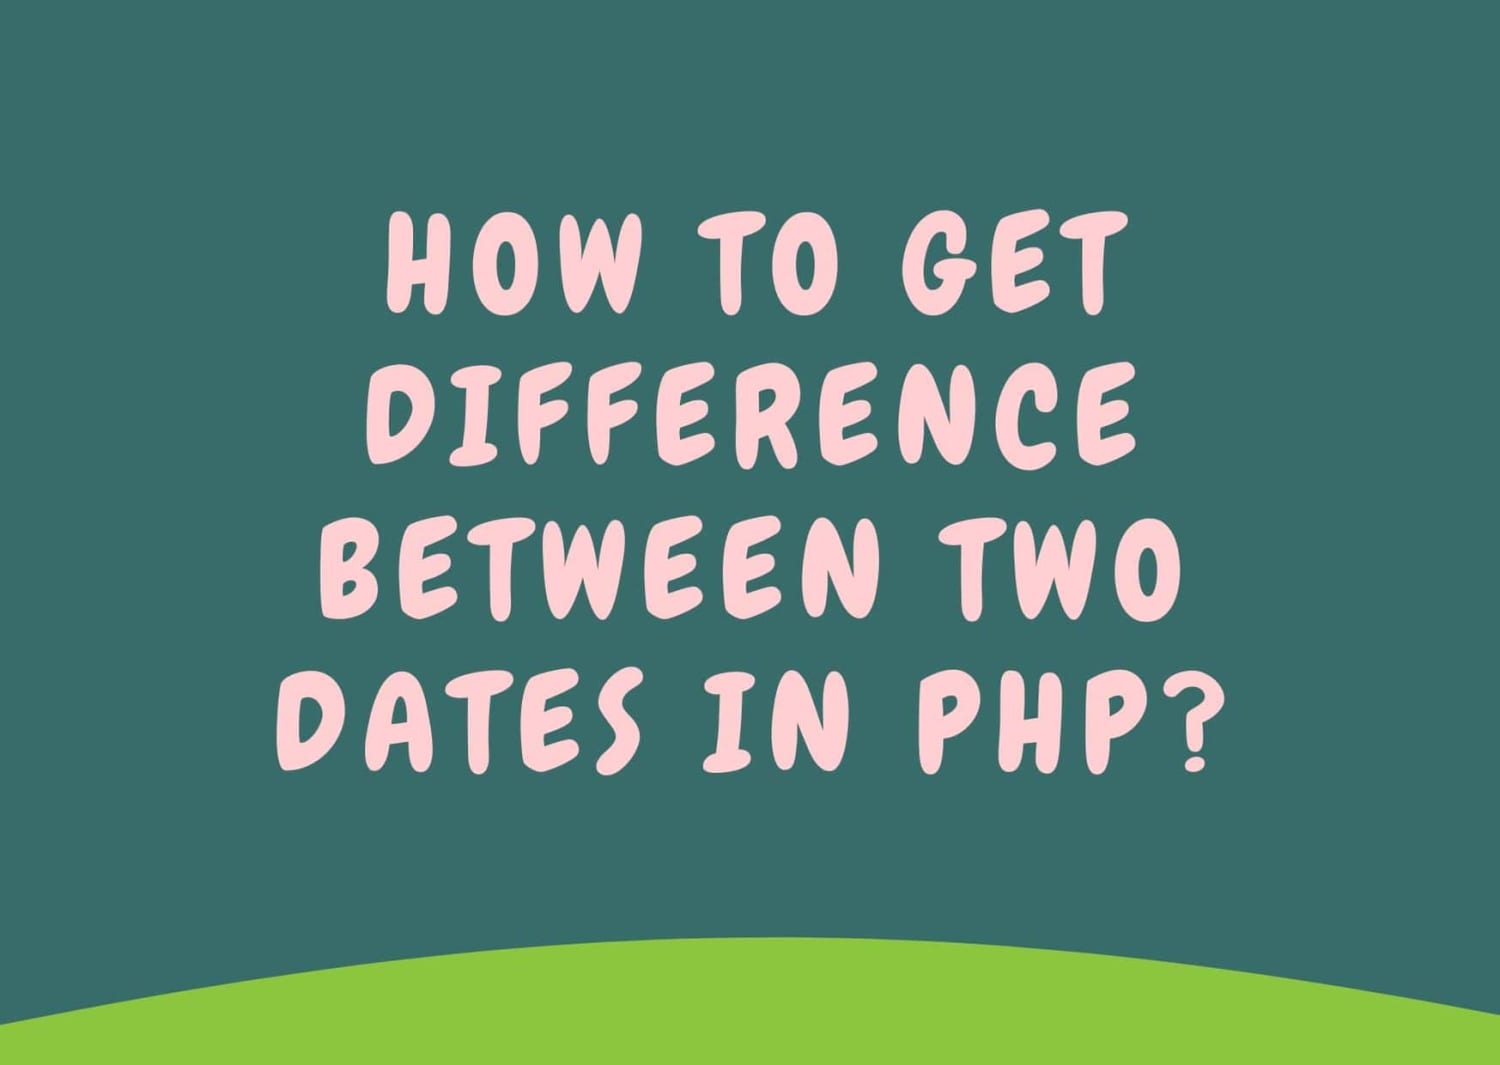 How to Get Difference Between Two Dates in PHP ?